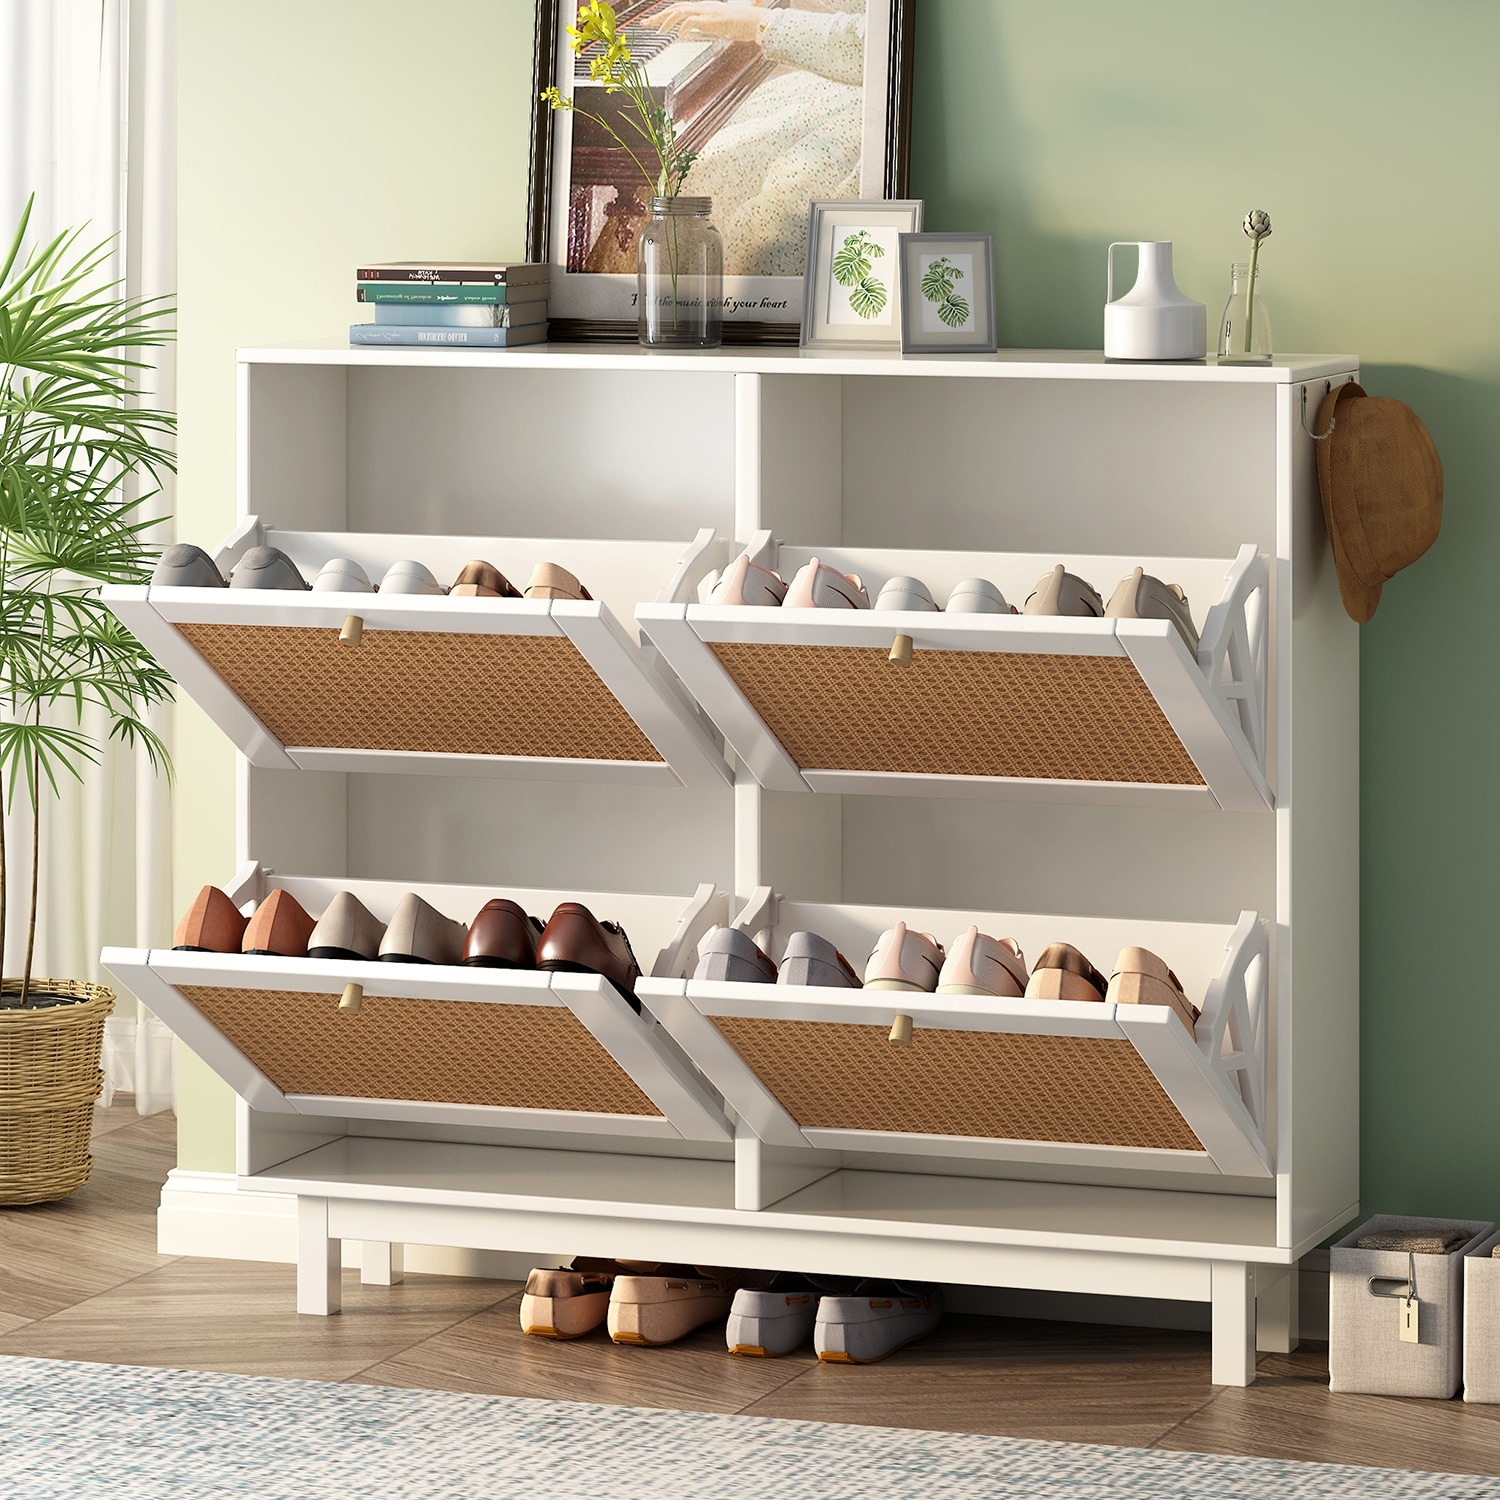 https://ak1.ostkcdn.com/images/products/is/images/direct/57882f57bbe5a67c6c8b4fb38e1d11053244bceb/Shoe-Cabinet-with-4-Flip-Drawers%2C2-Tier-Shoe-Storage-Organizer.jpg